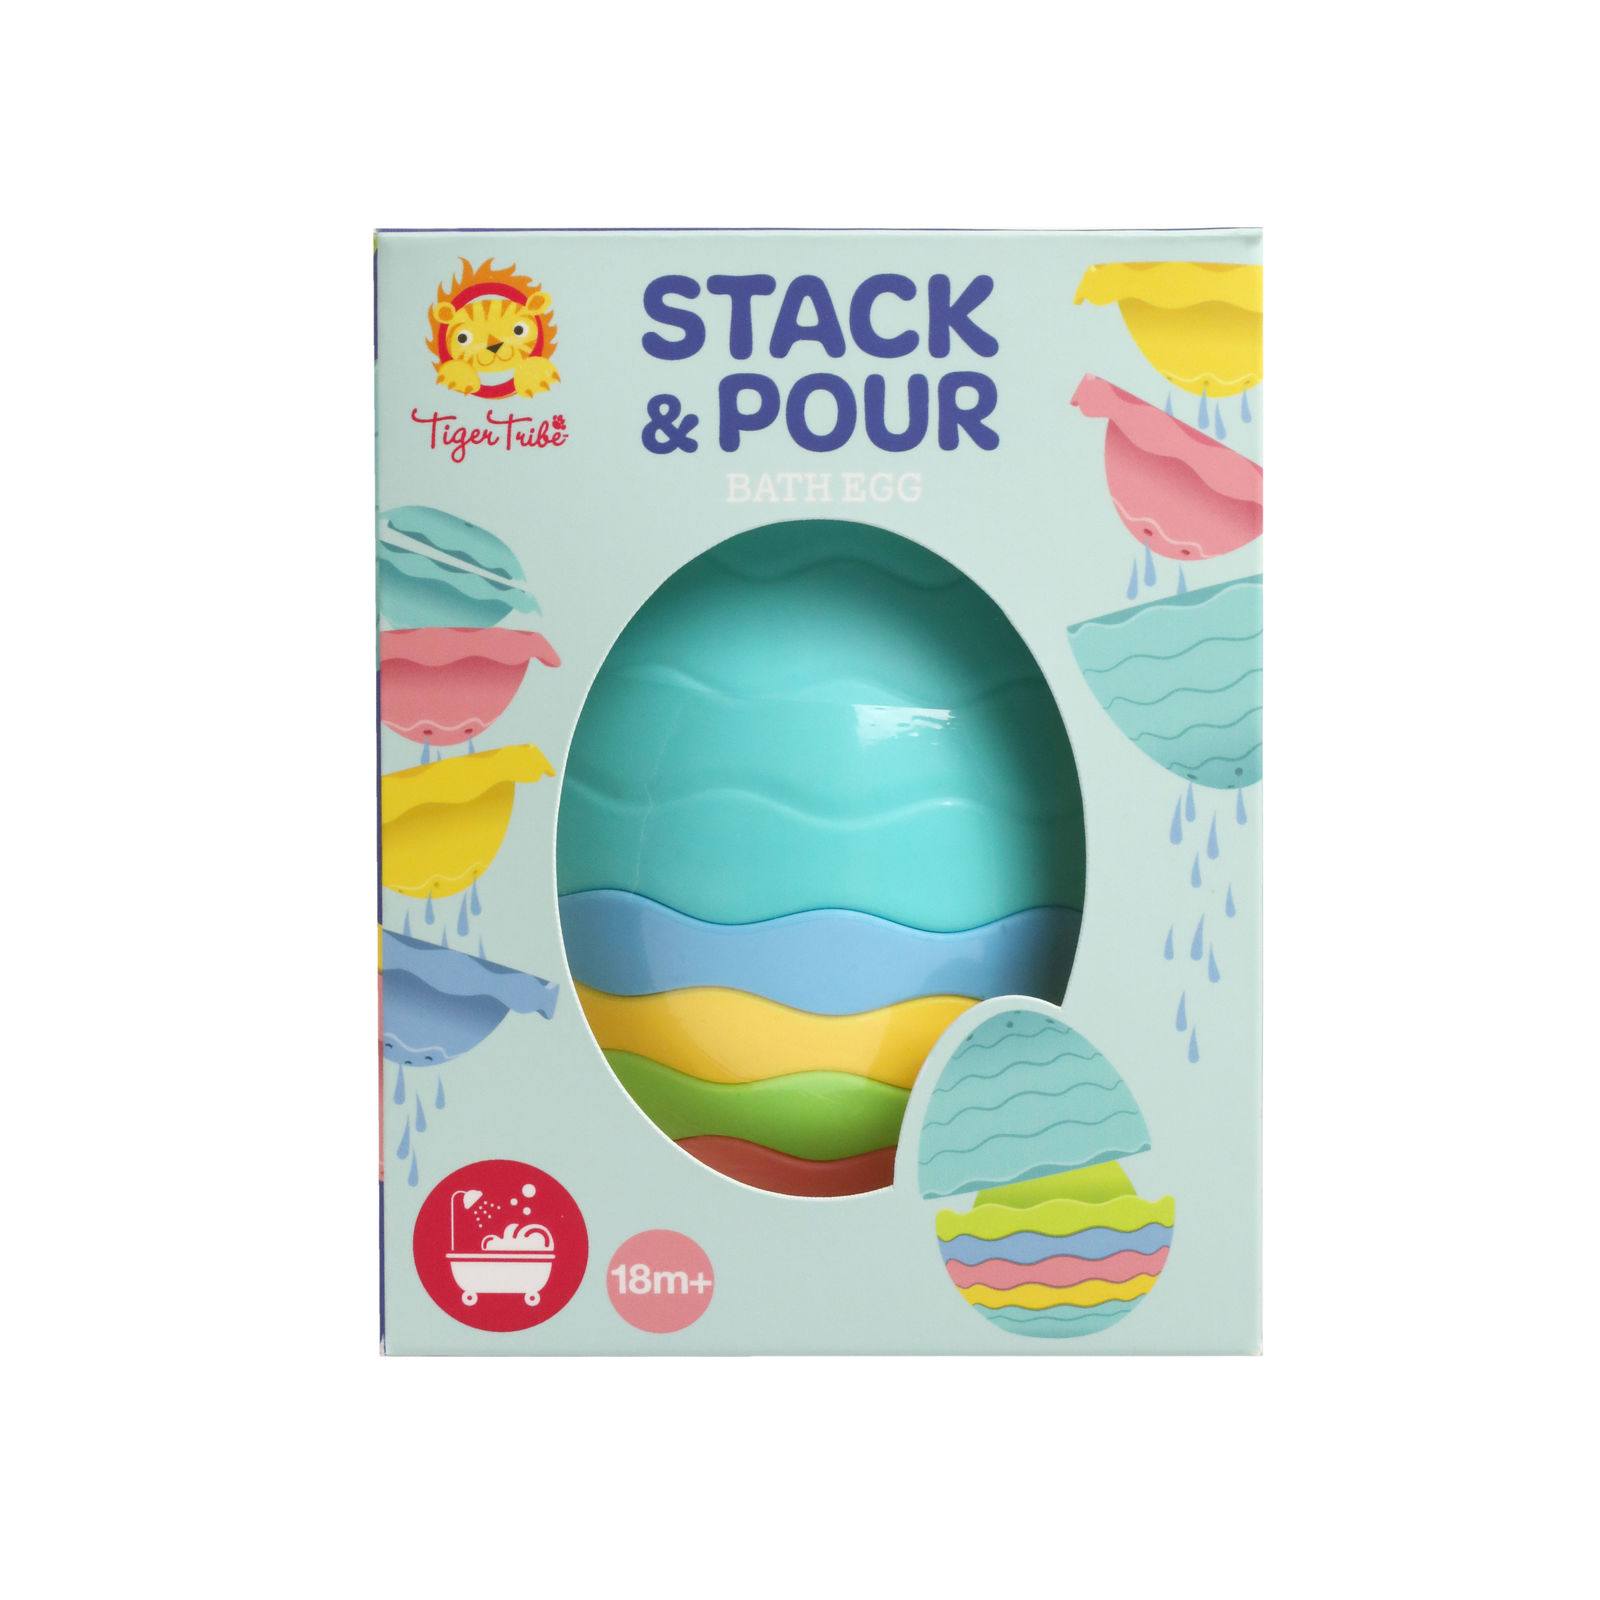 Tiger Tribe Stack and Pour Bath Egg | Bath Toys